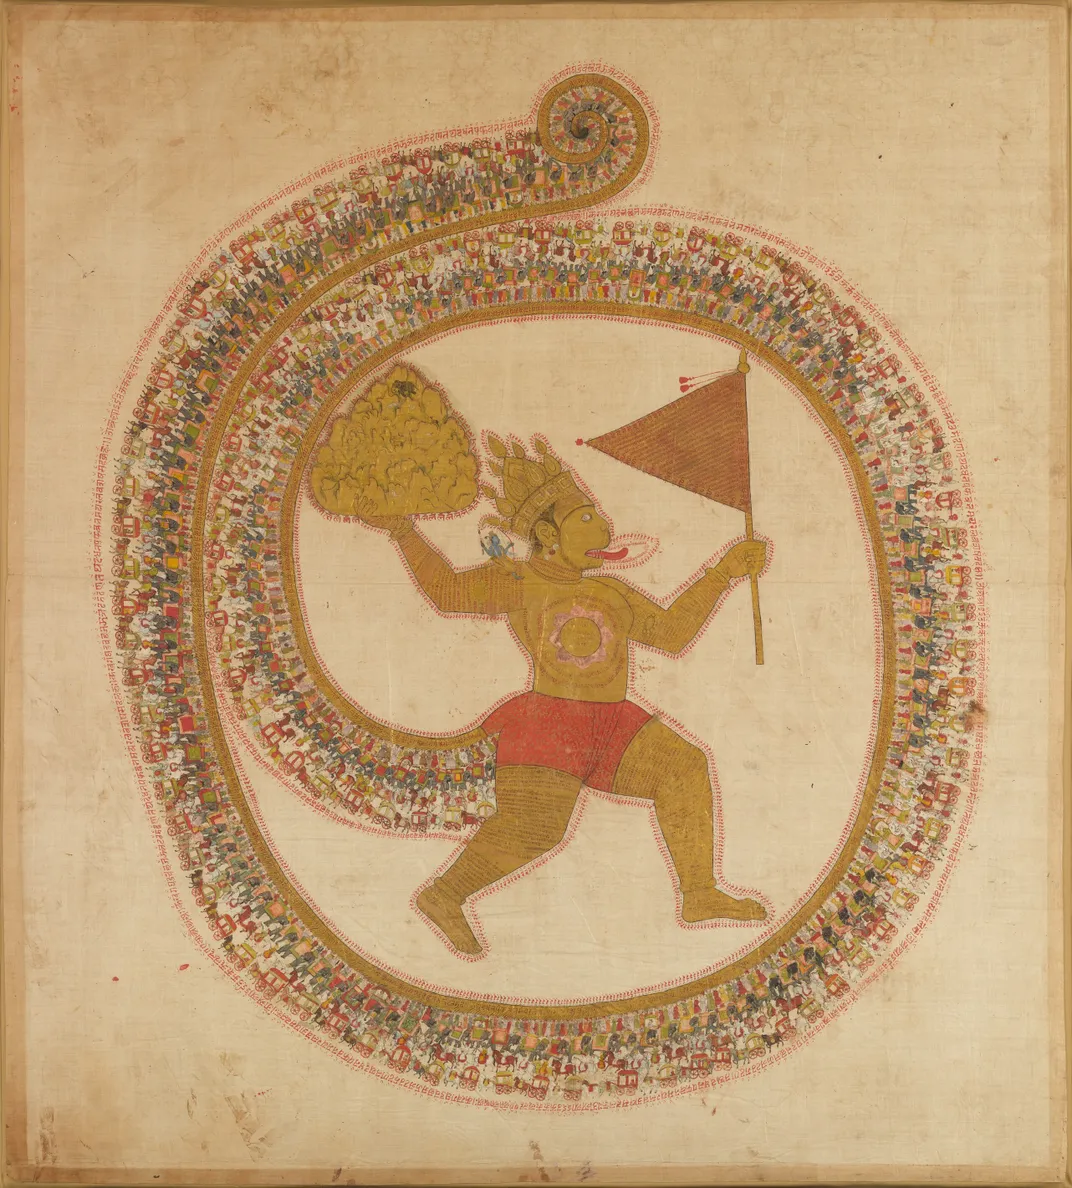 A devotional image of Hanuman carrying a mountaintop with medicinal herbs to Rama and his brother